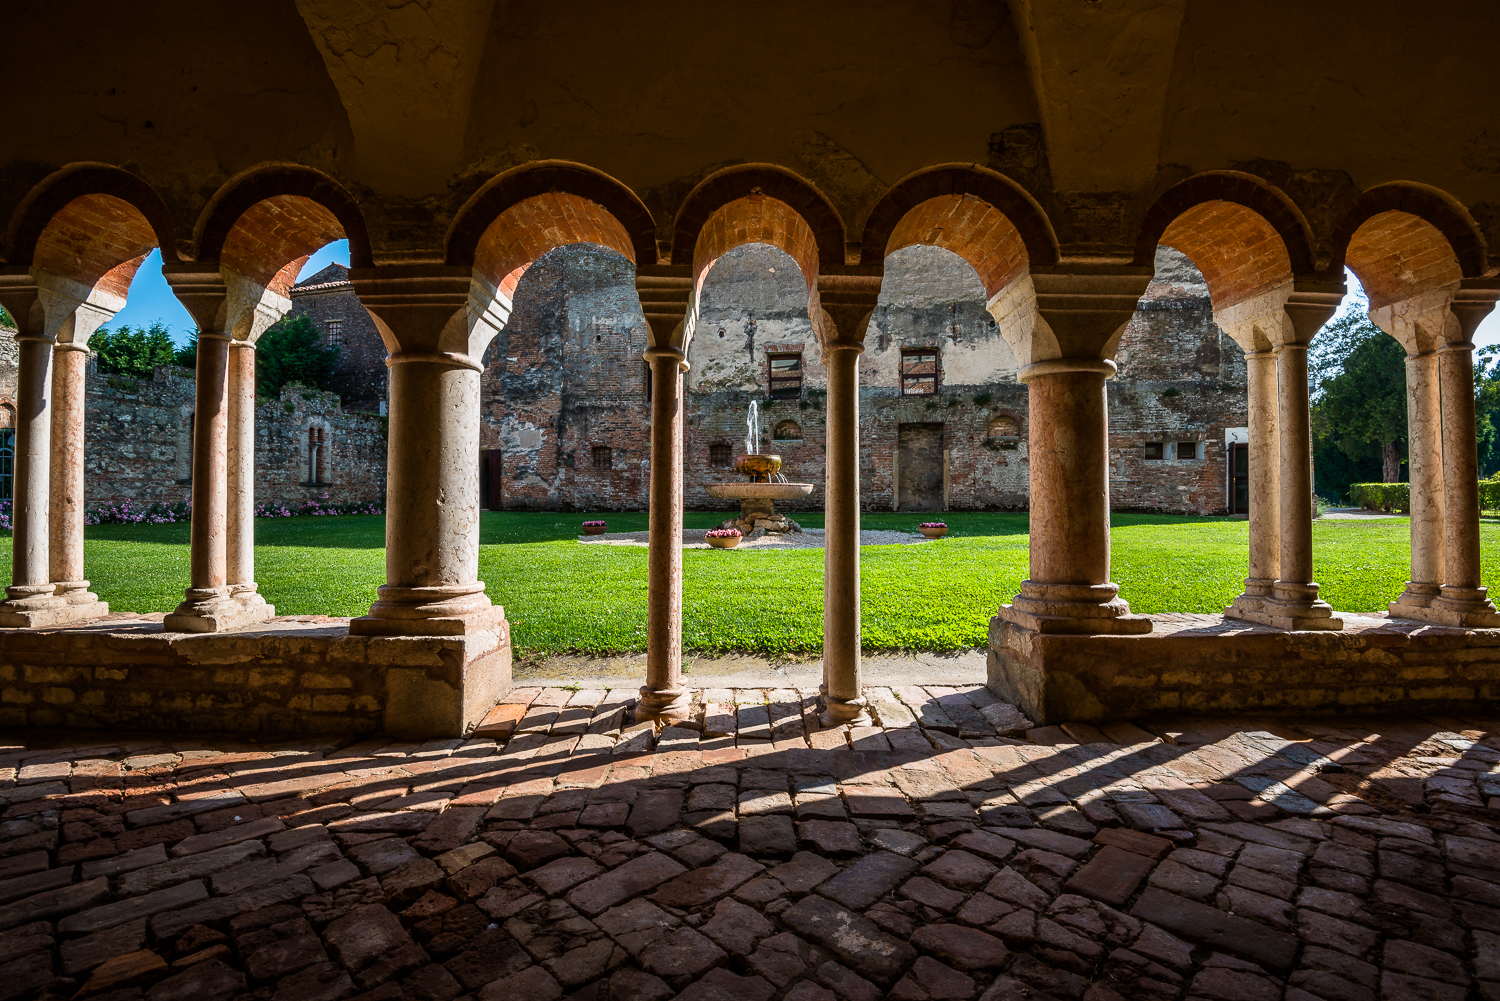 The small cloister...